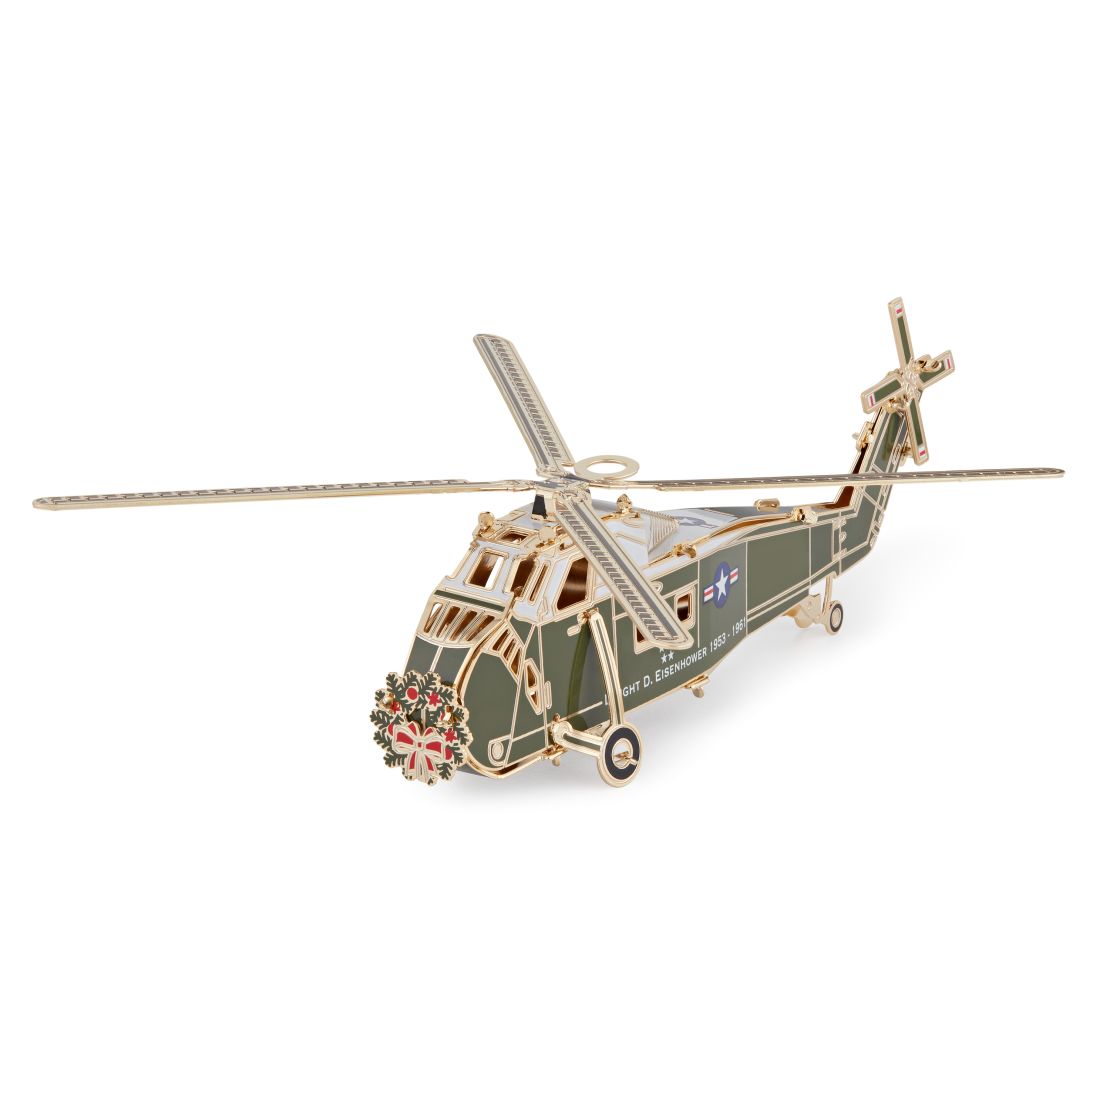 The 2019 ornament honored Dwight Eisenhower, the first president to regularly fly by helicopter.